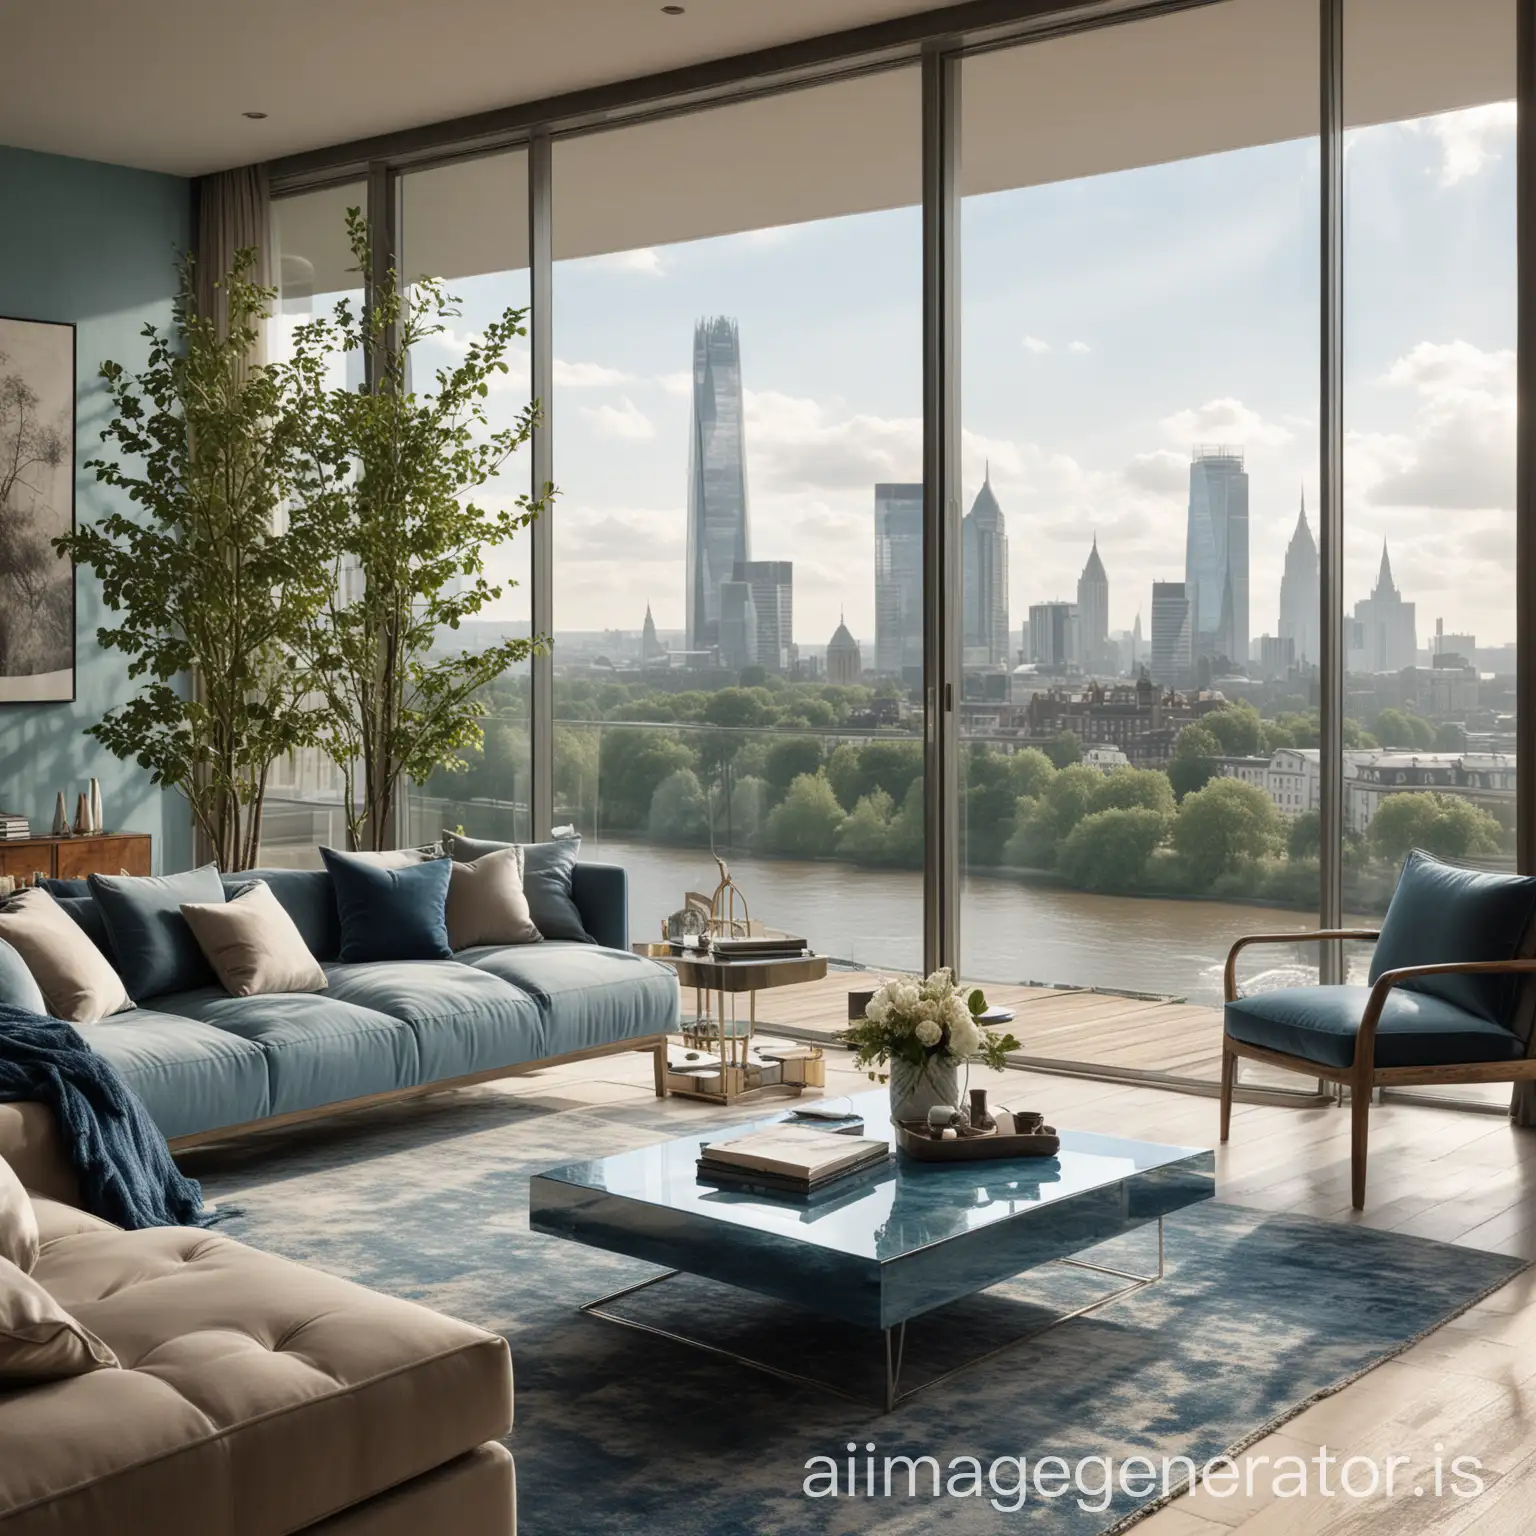 A lavish apartment interior design with a Thames River, trees and city panorama, terrace behind the window, featuring contemporary furniture, a blend of earthy and blue hues inspired by the river, floor-to-ceiling windows, terase, allowing natural shiny light to illuminate the space, and a serene, airy ambiance, rays of light, using clay and mixed media, carefreeness